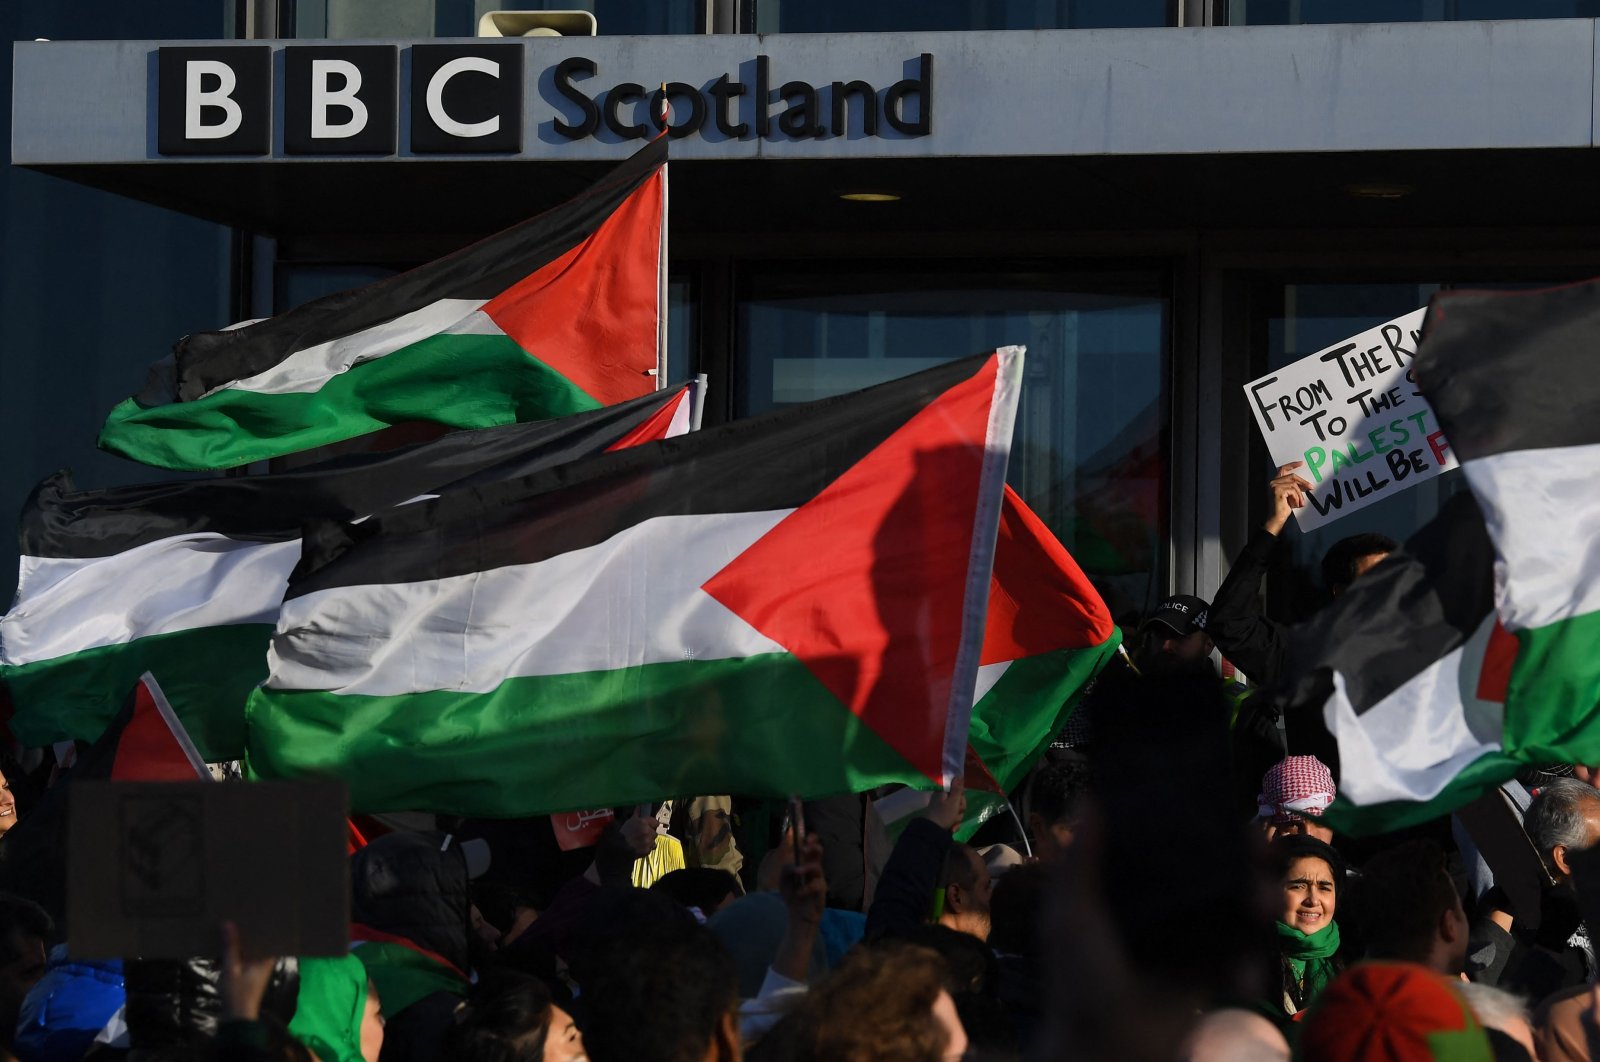 Palestinian flags are waved outside the BBC Scotland building as people take part in a demonstration to show solidarity with the Palestinian People, in Glasgow, Scotland, Oct. 14, 2023. (AFP Photo)